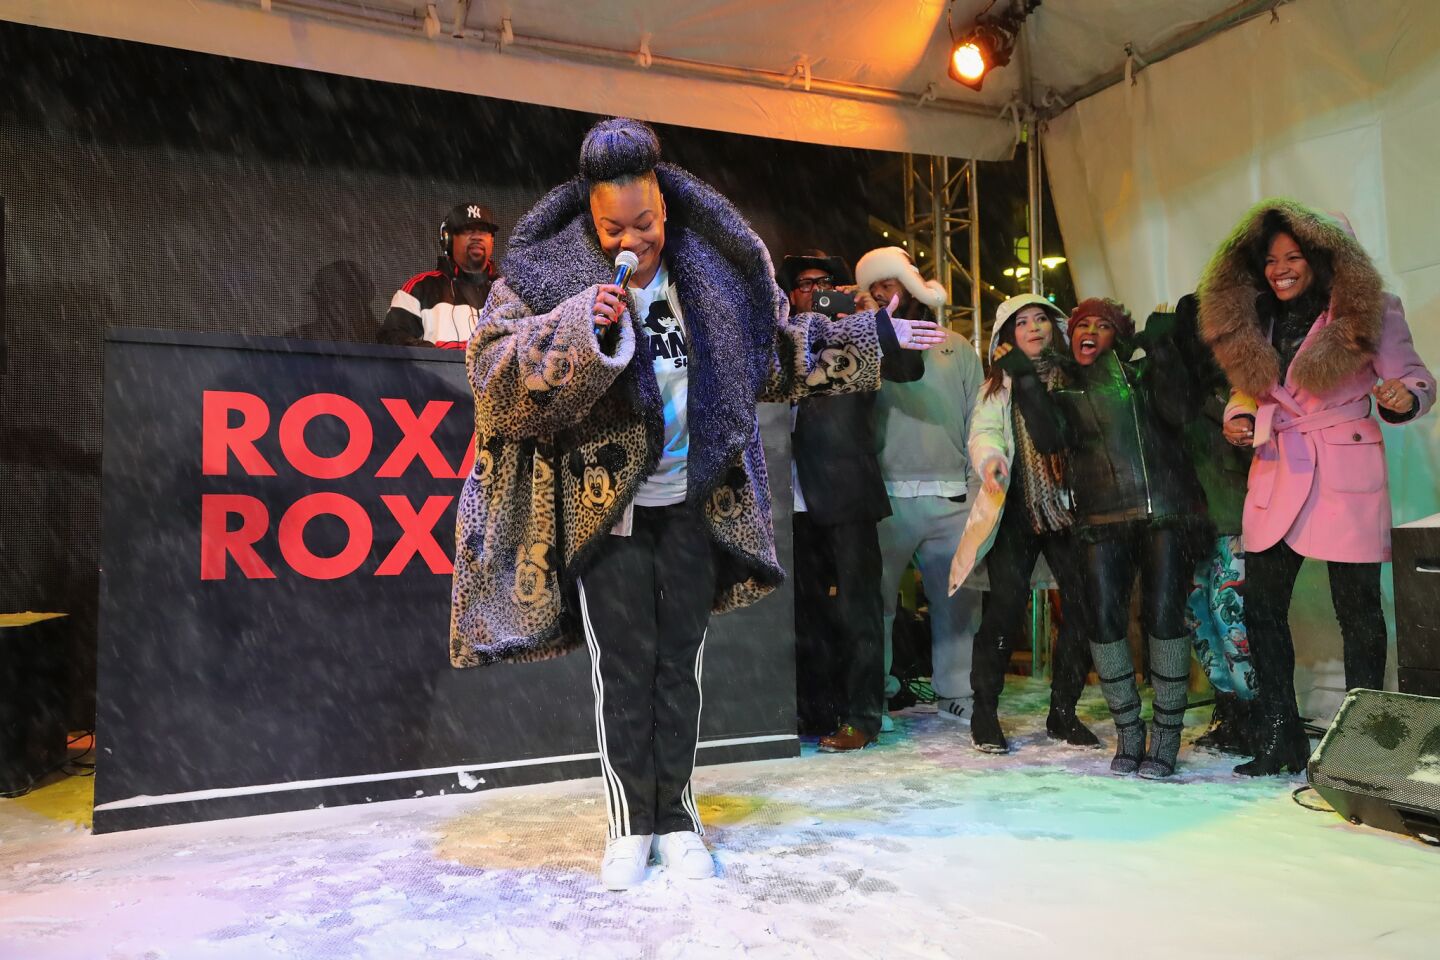 Roxanne Shante performs onstage at the Jan. 22 "Roxanne, Roxanne" party in the Acura Festival Village during the Sundance Film Festival in Park City, Utah.